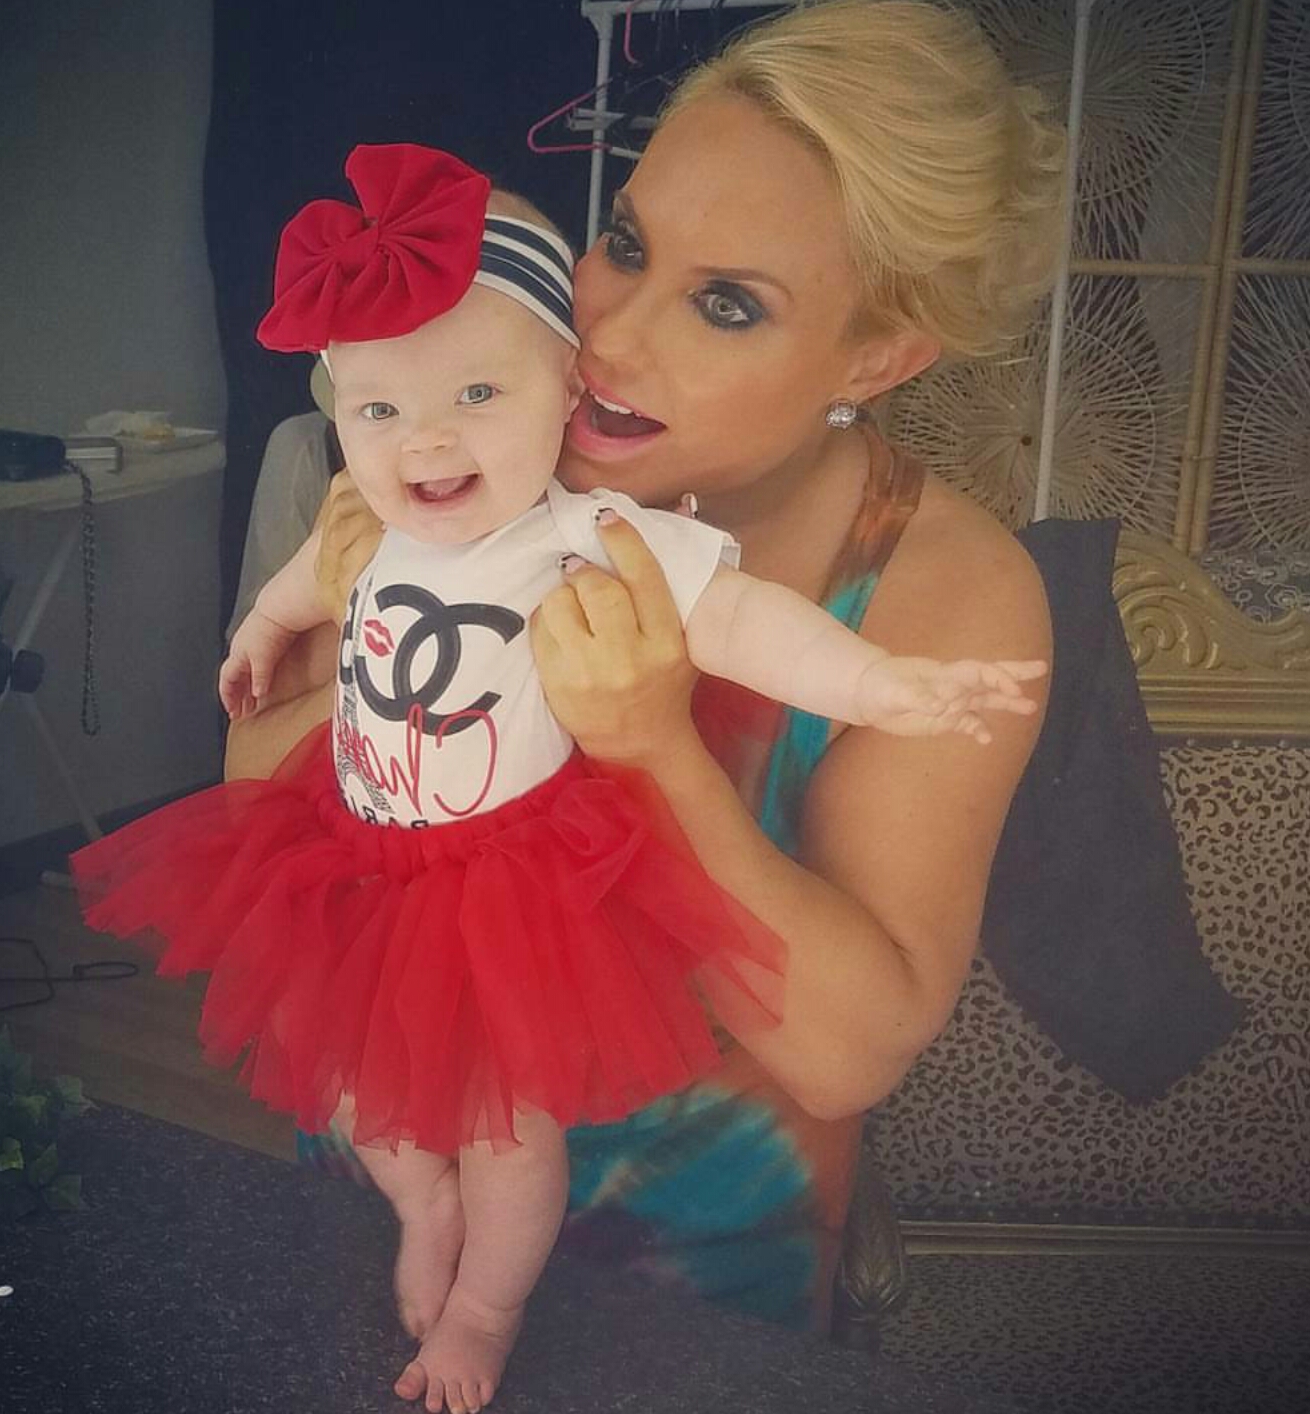 Entertainment/sports/news/: Coco shares more cute photos of baby Chanel ...